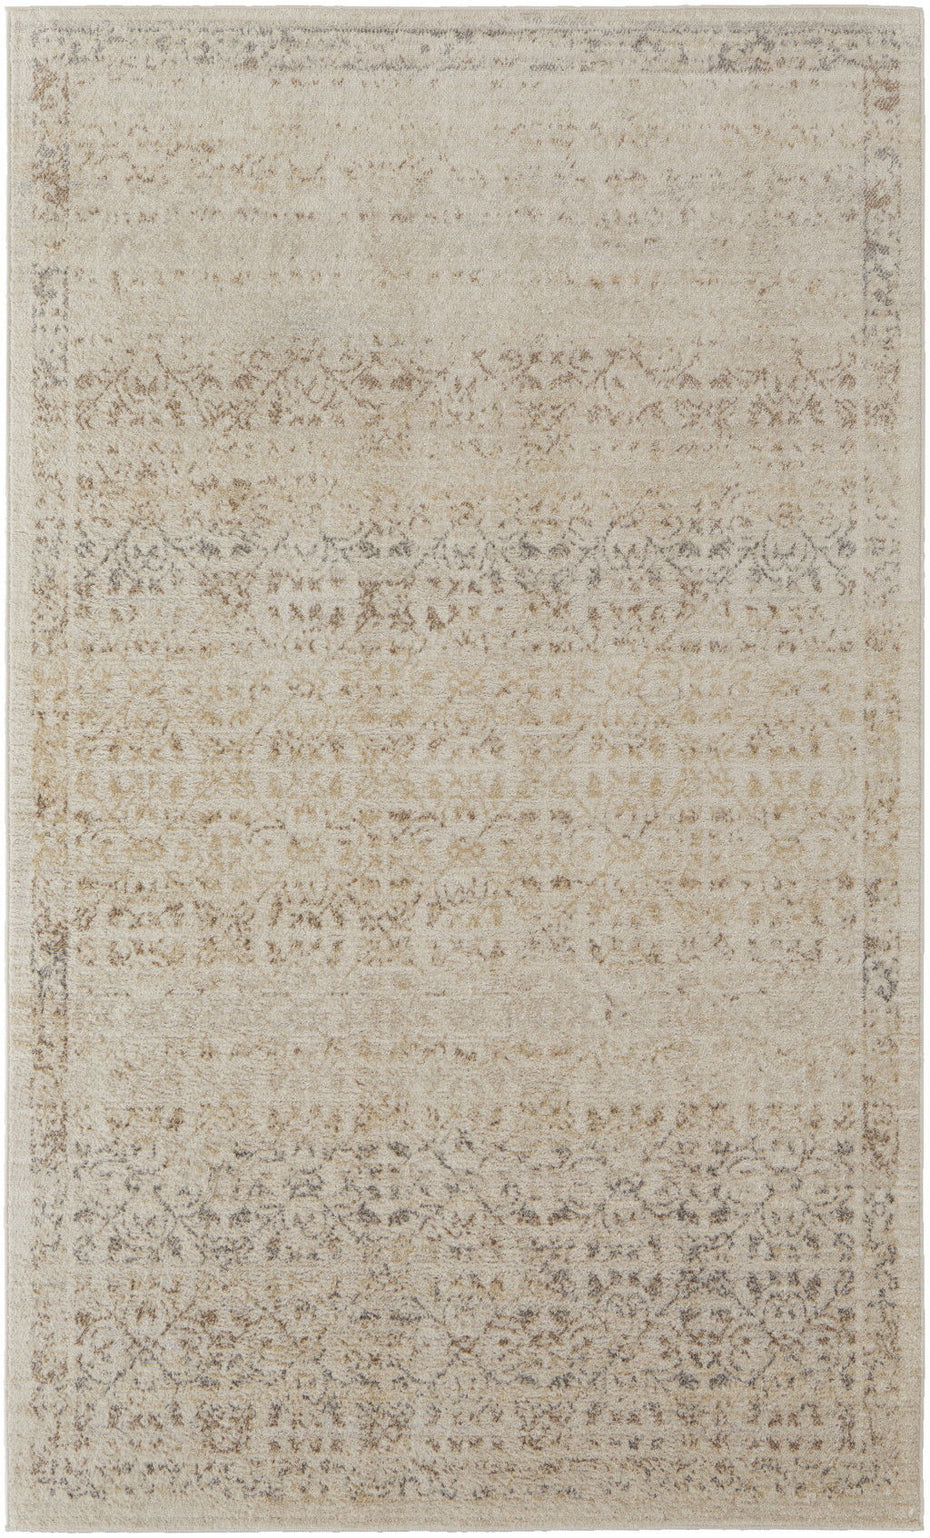 Abstract Power Loom Distressed Area Rug - Ivory Tan And Gray - 7' X 10'